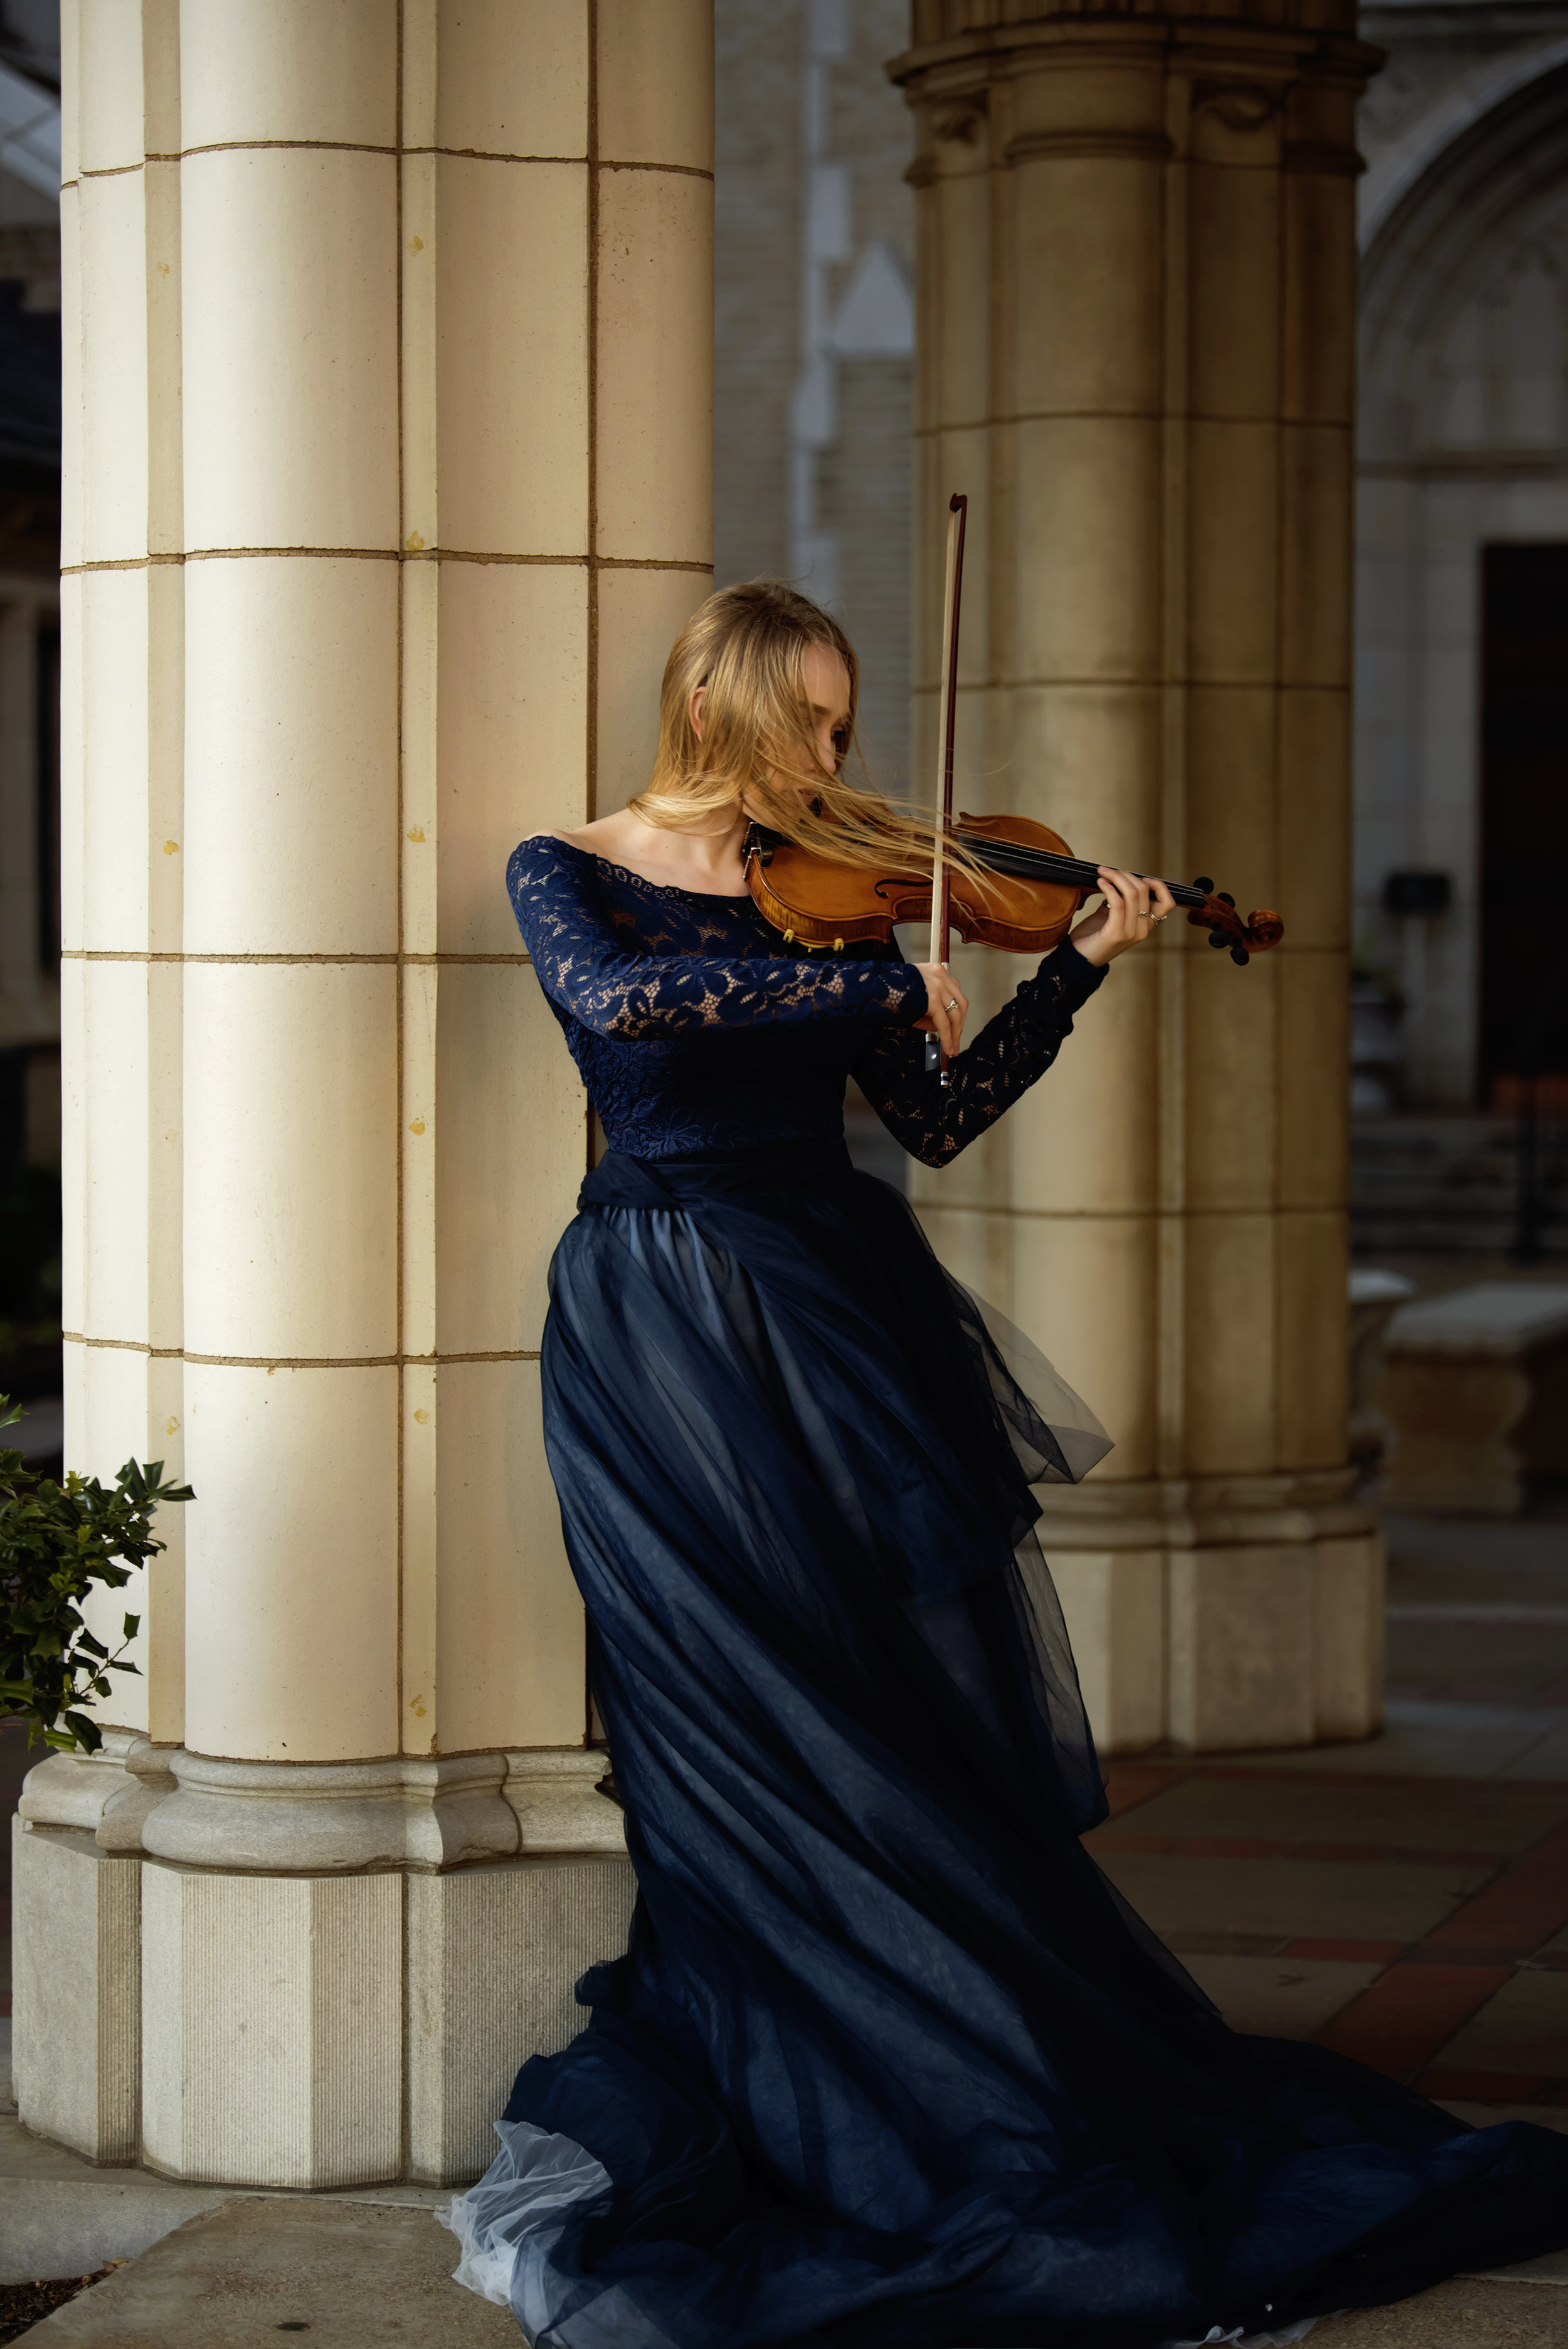  Active portrait, woman in blue dress paying violin standing next to columns. 